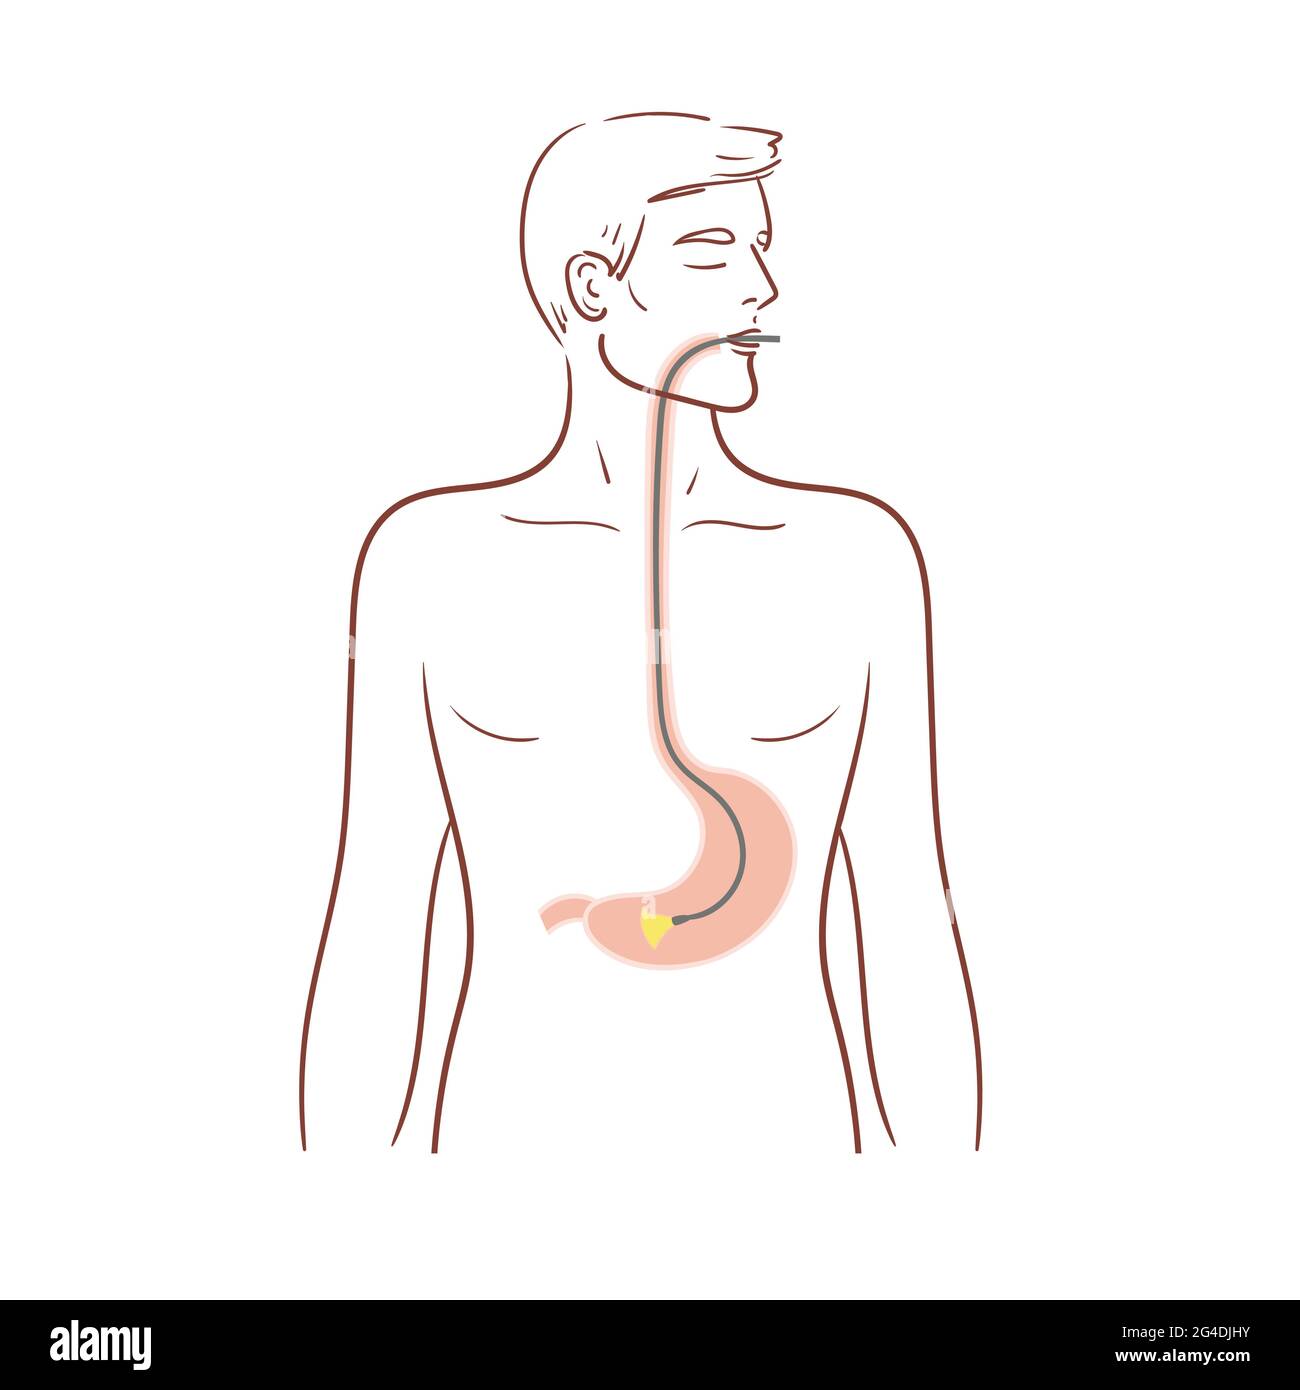 Gastroscopy of the stomach. Esophagoscopy,diagnostic procedure.A man is undergoing a medical examination. Stock isolated illustration on white Stock Vector